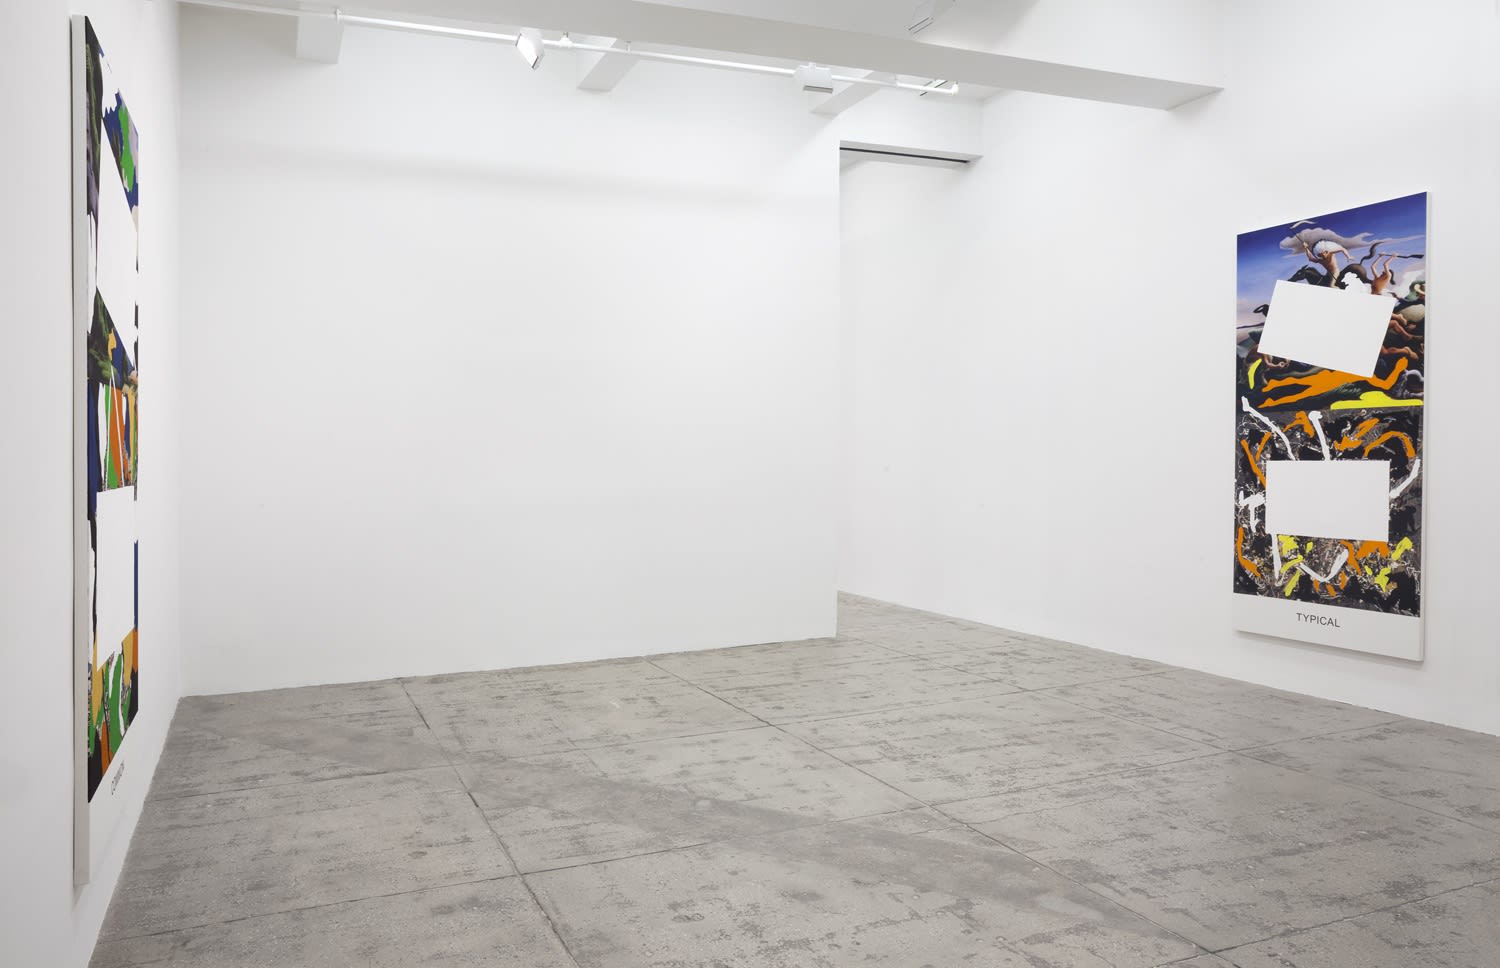 2 paintings partially covered with white rectangles hanging in a gallery space.